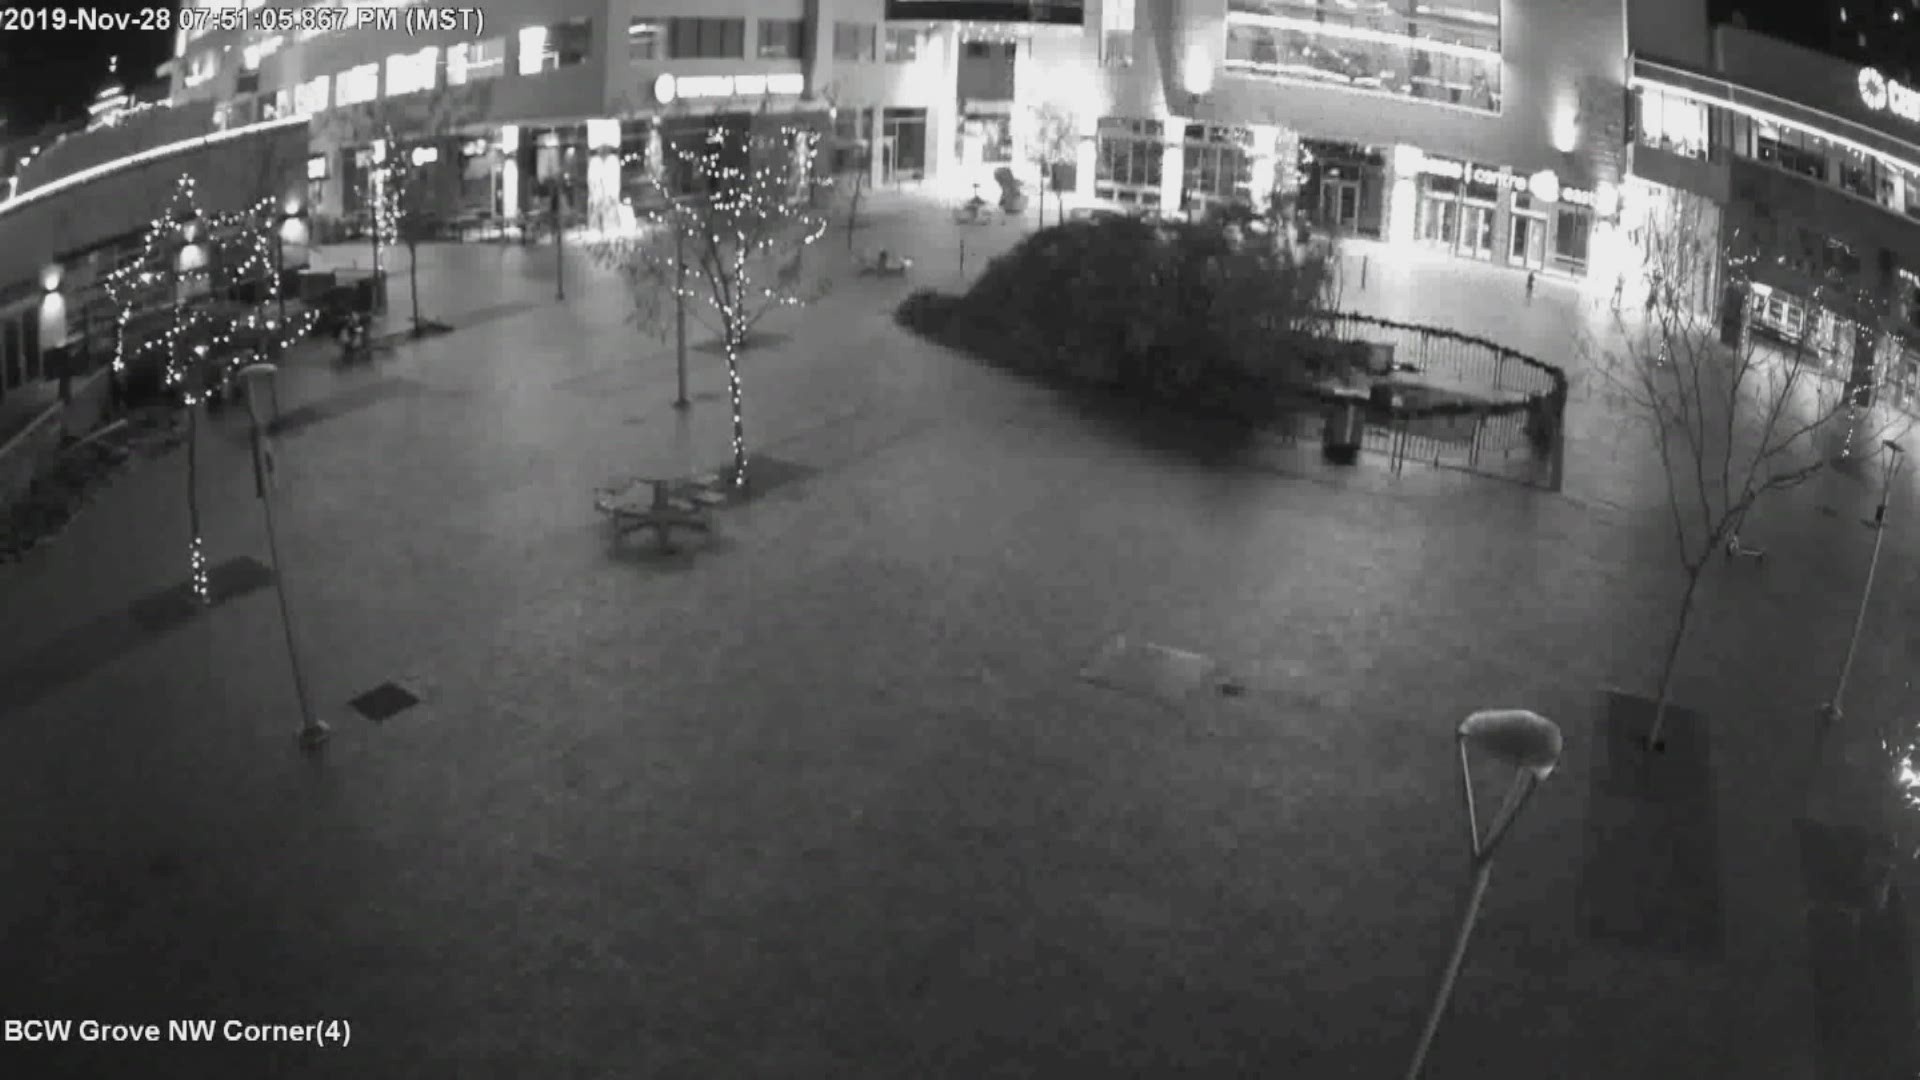 This is unedited security video provided by the Boise Centre.